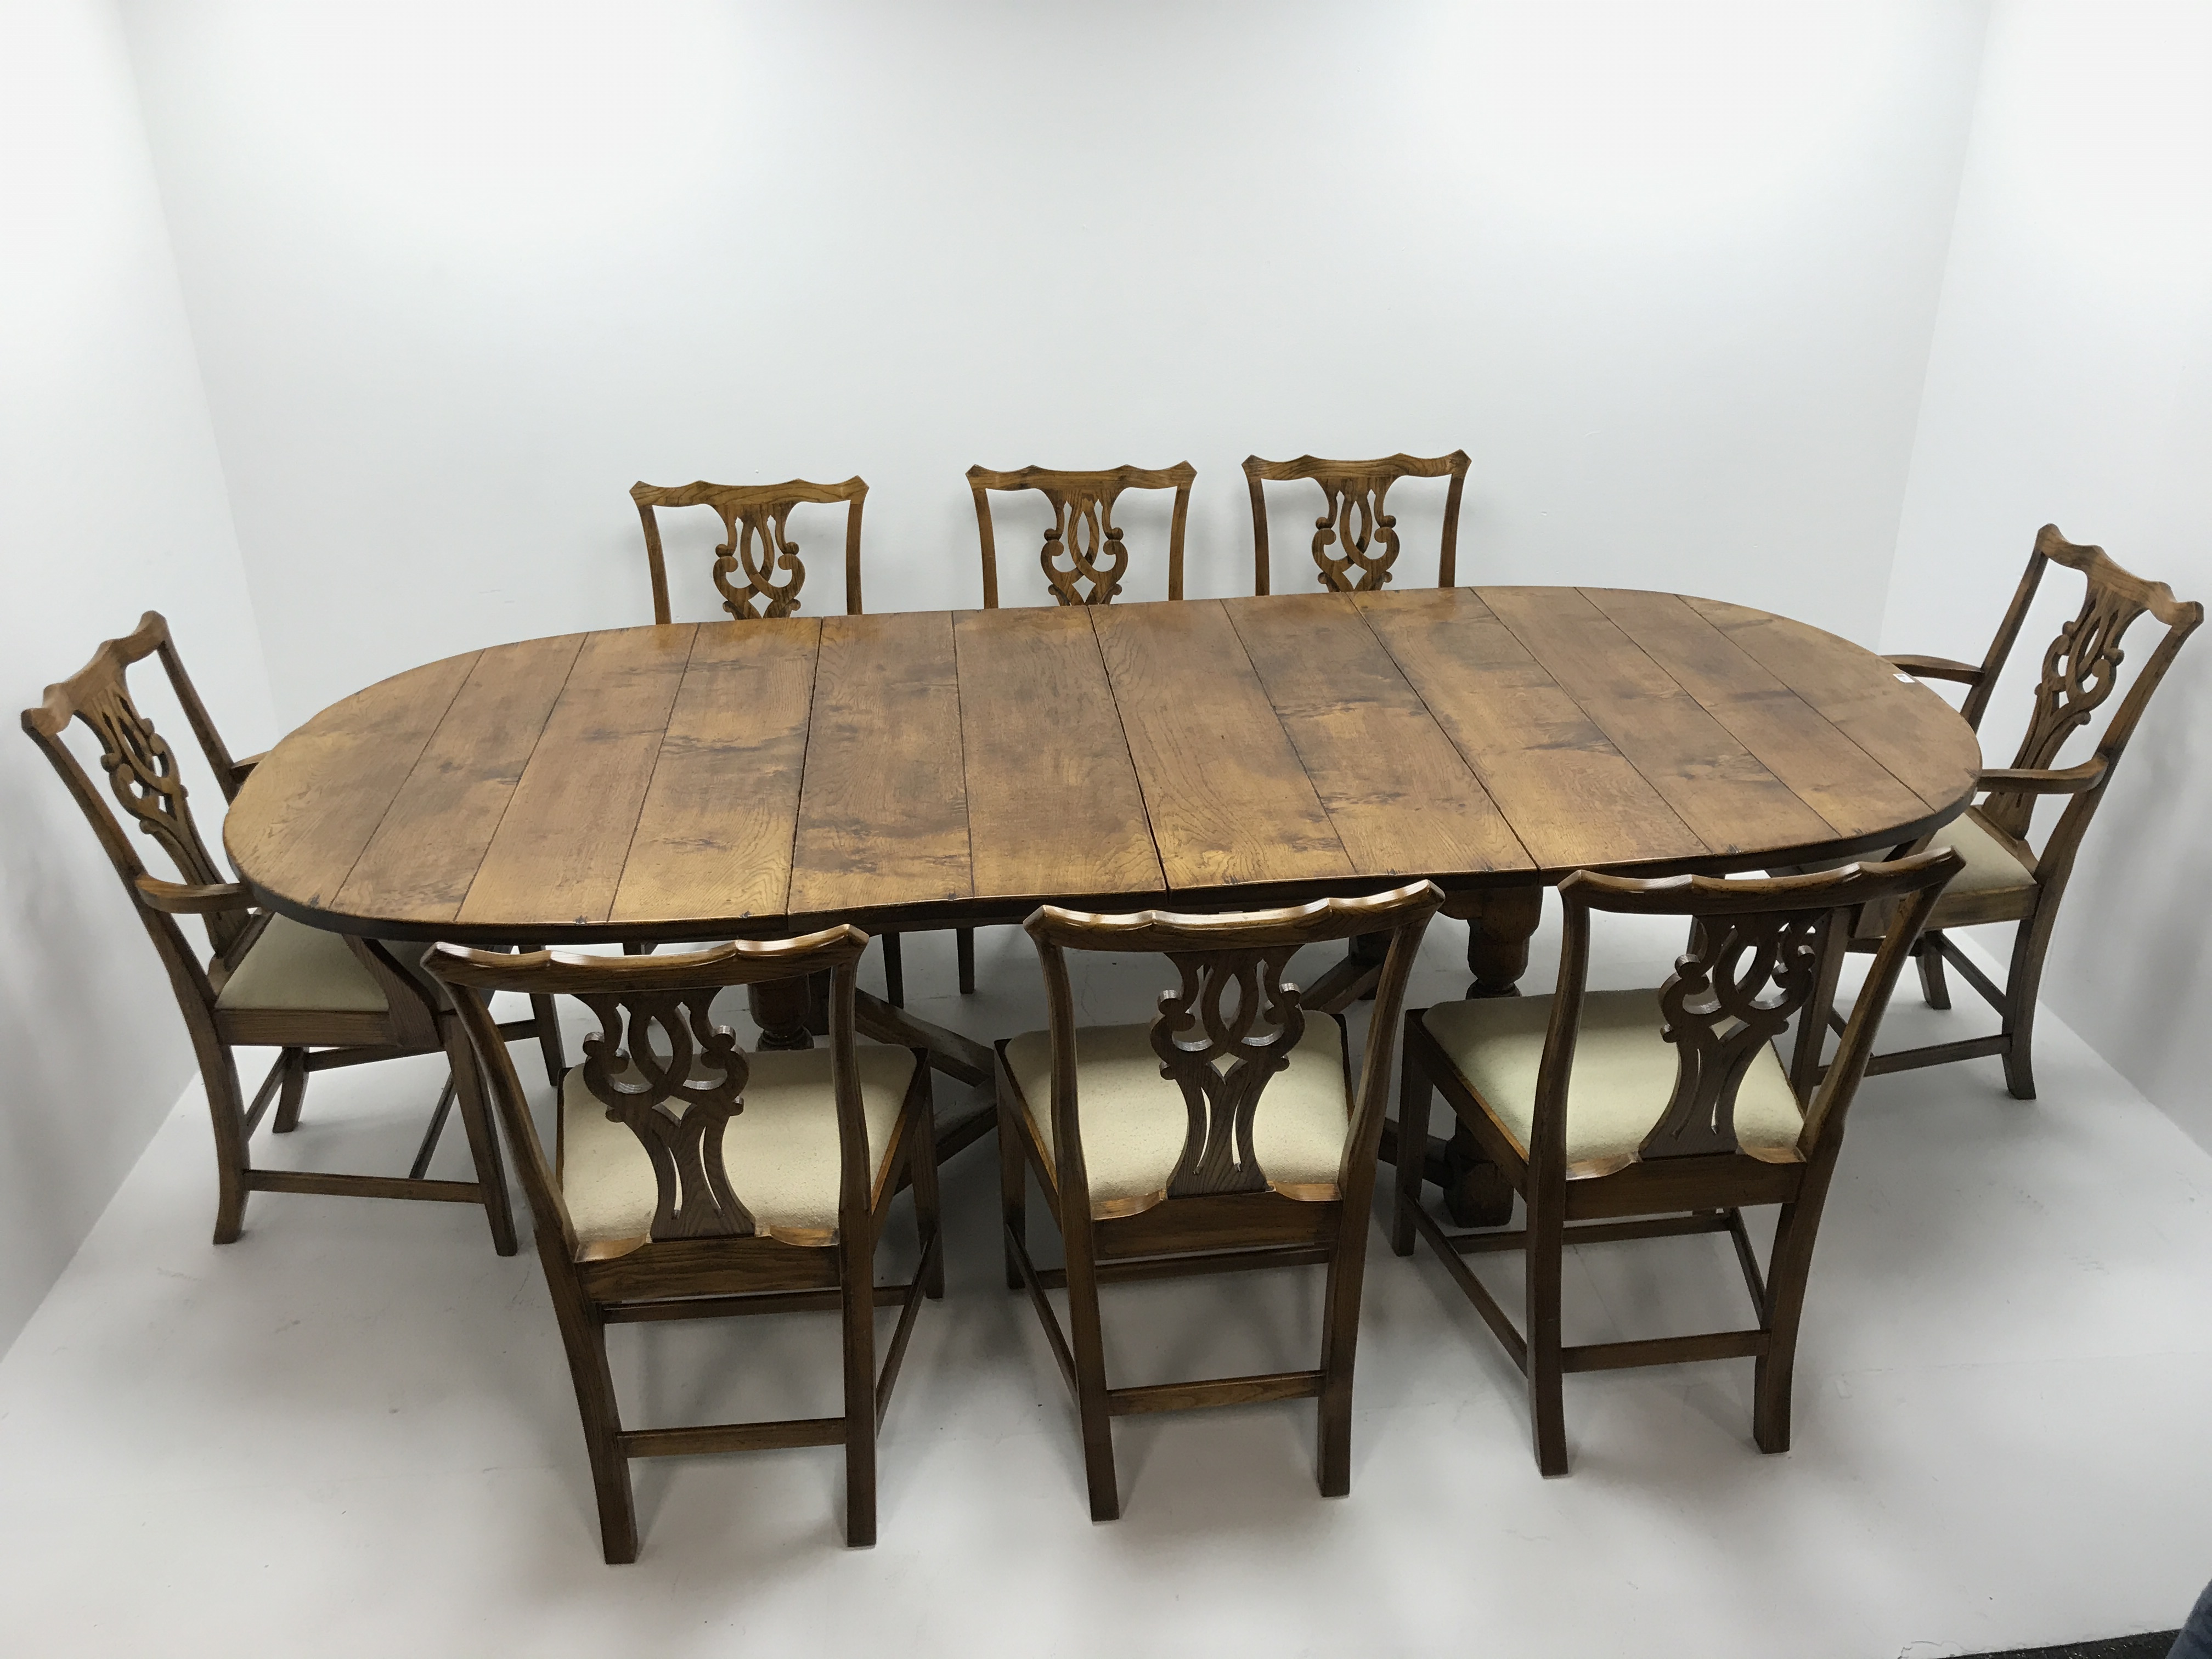 19th century style extending oak dining table, two leaves, baluster supports joined by shaped stretc - Image 13 of 20